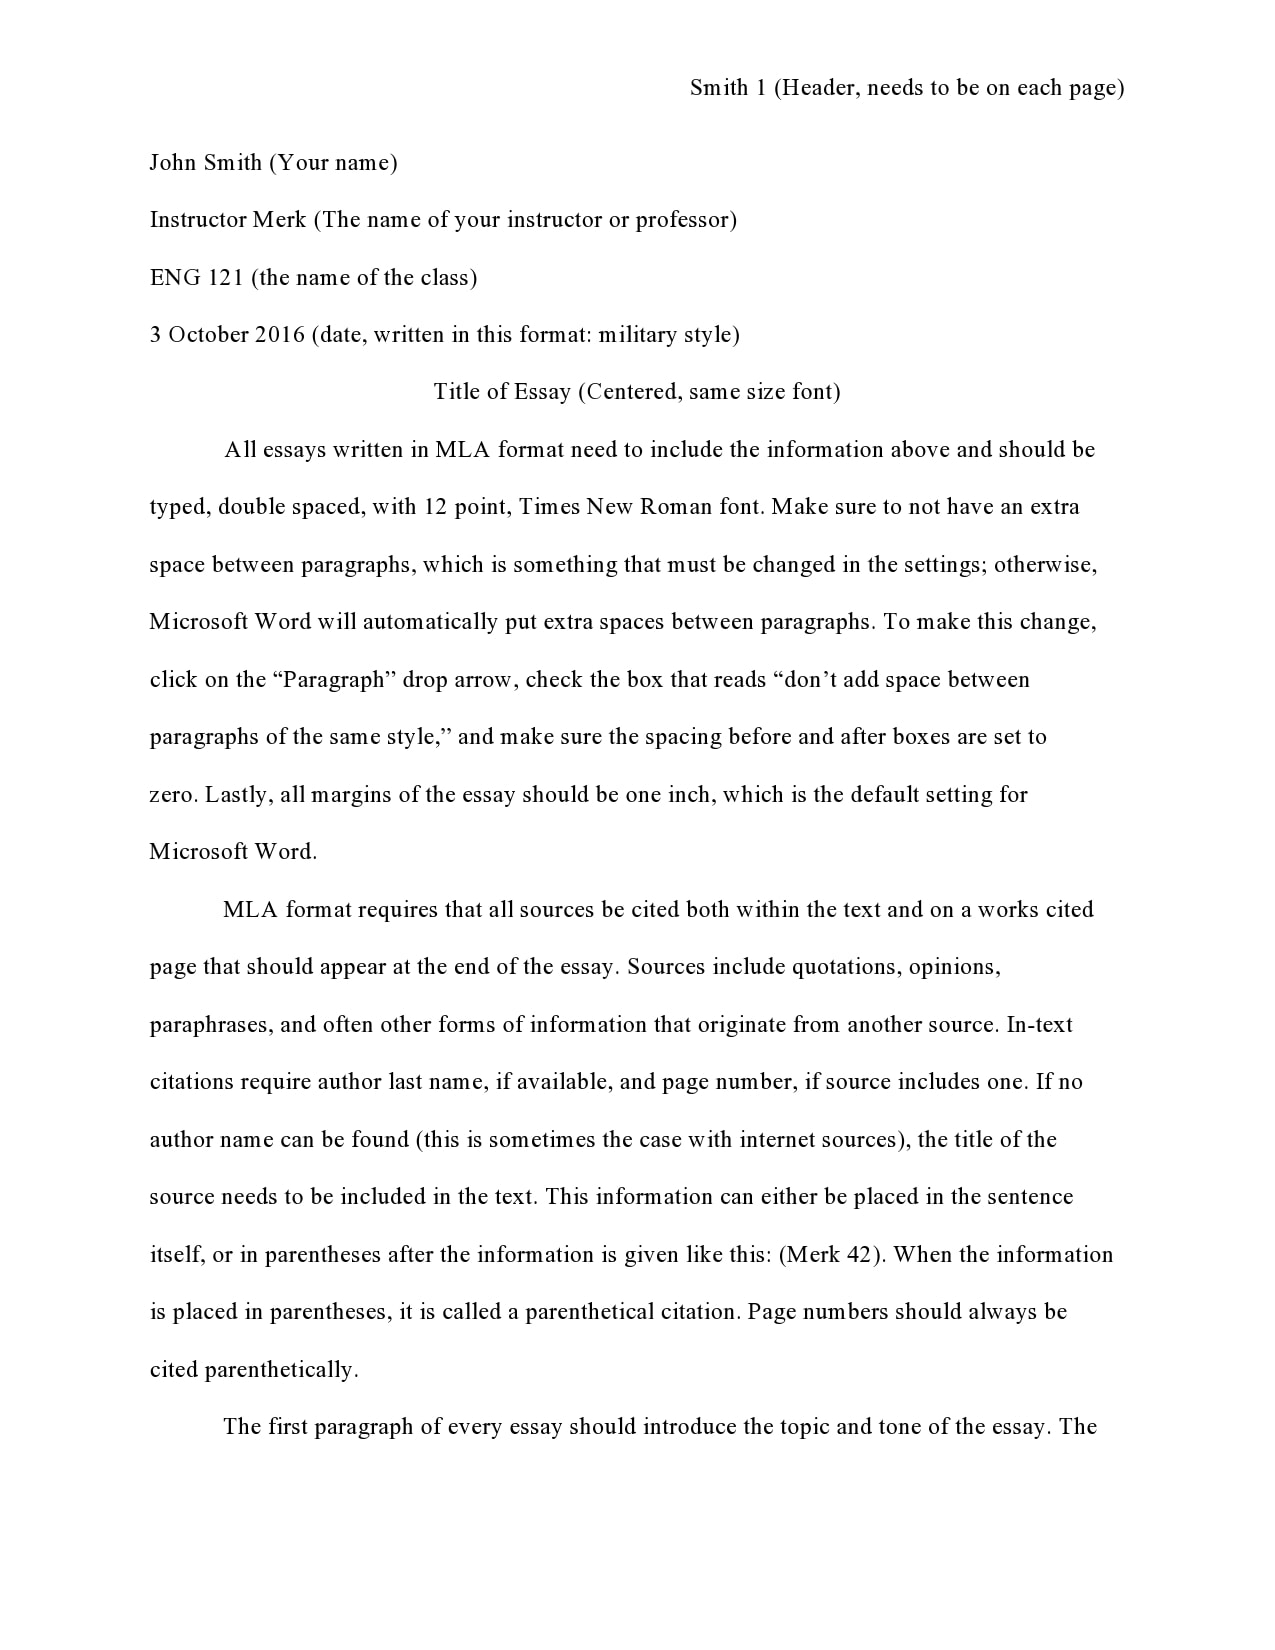 application to college essay example